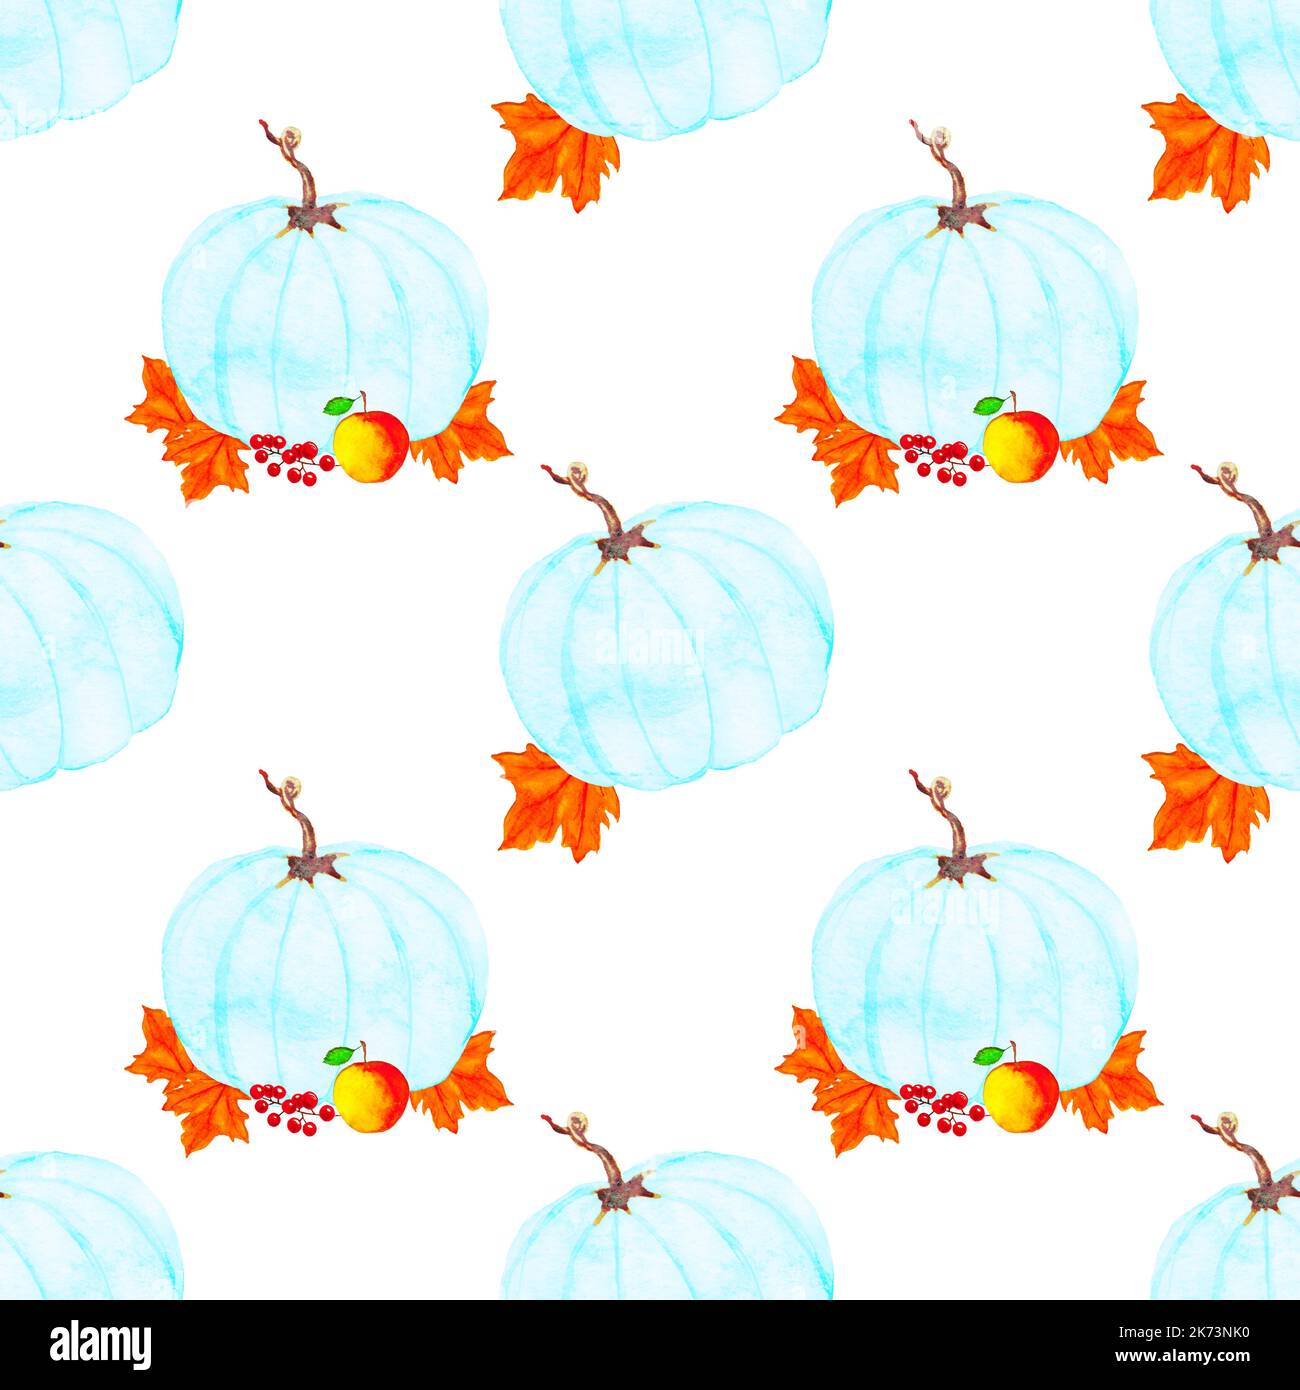 Thanksgiving day background, seamless background with blue watercolor pumpkins and autumn leaves, watercolor raster Thanksgiving seamless illustration Stock Photo